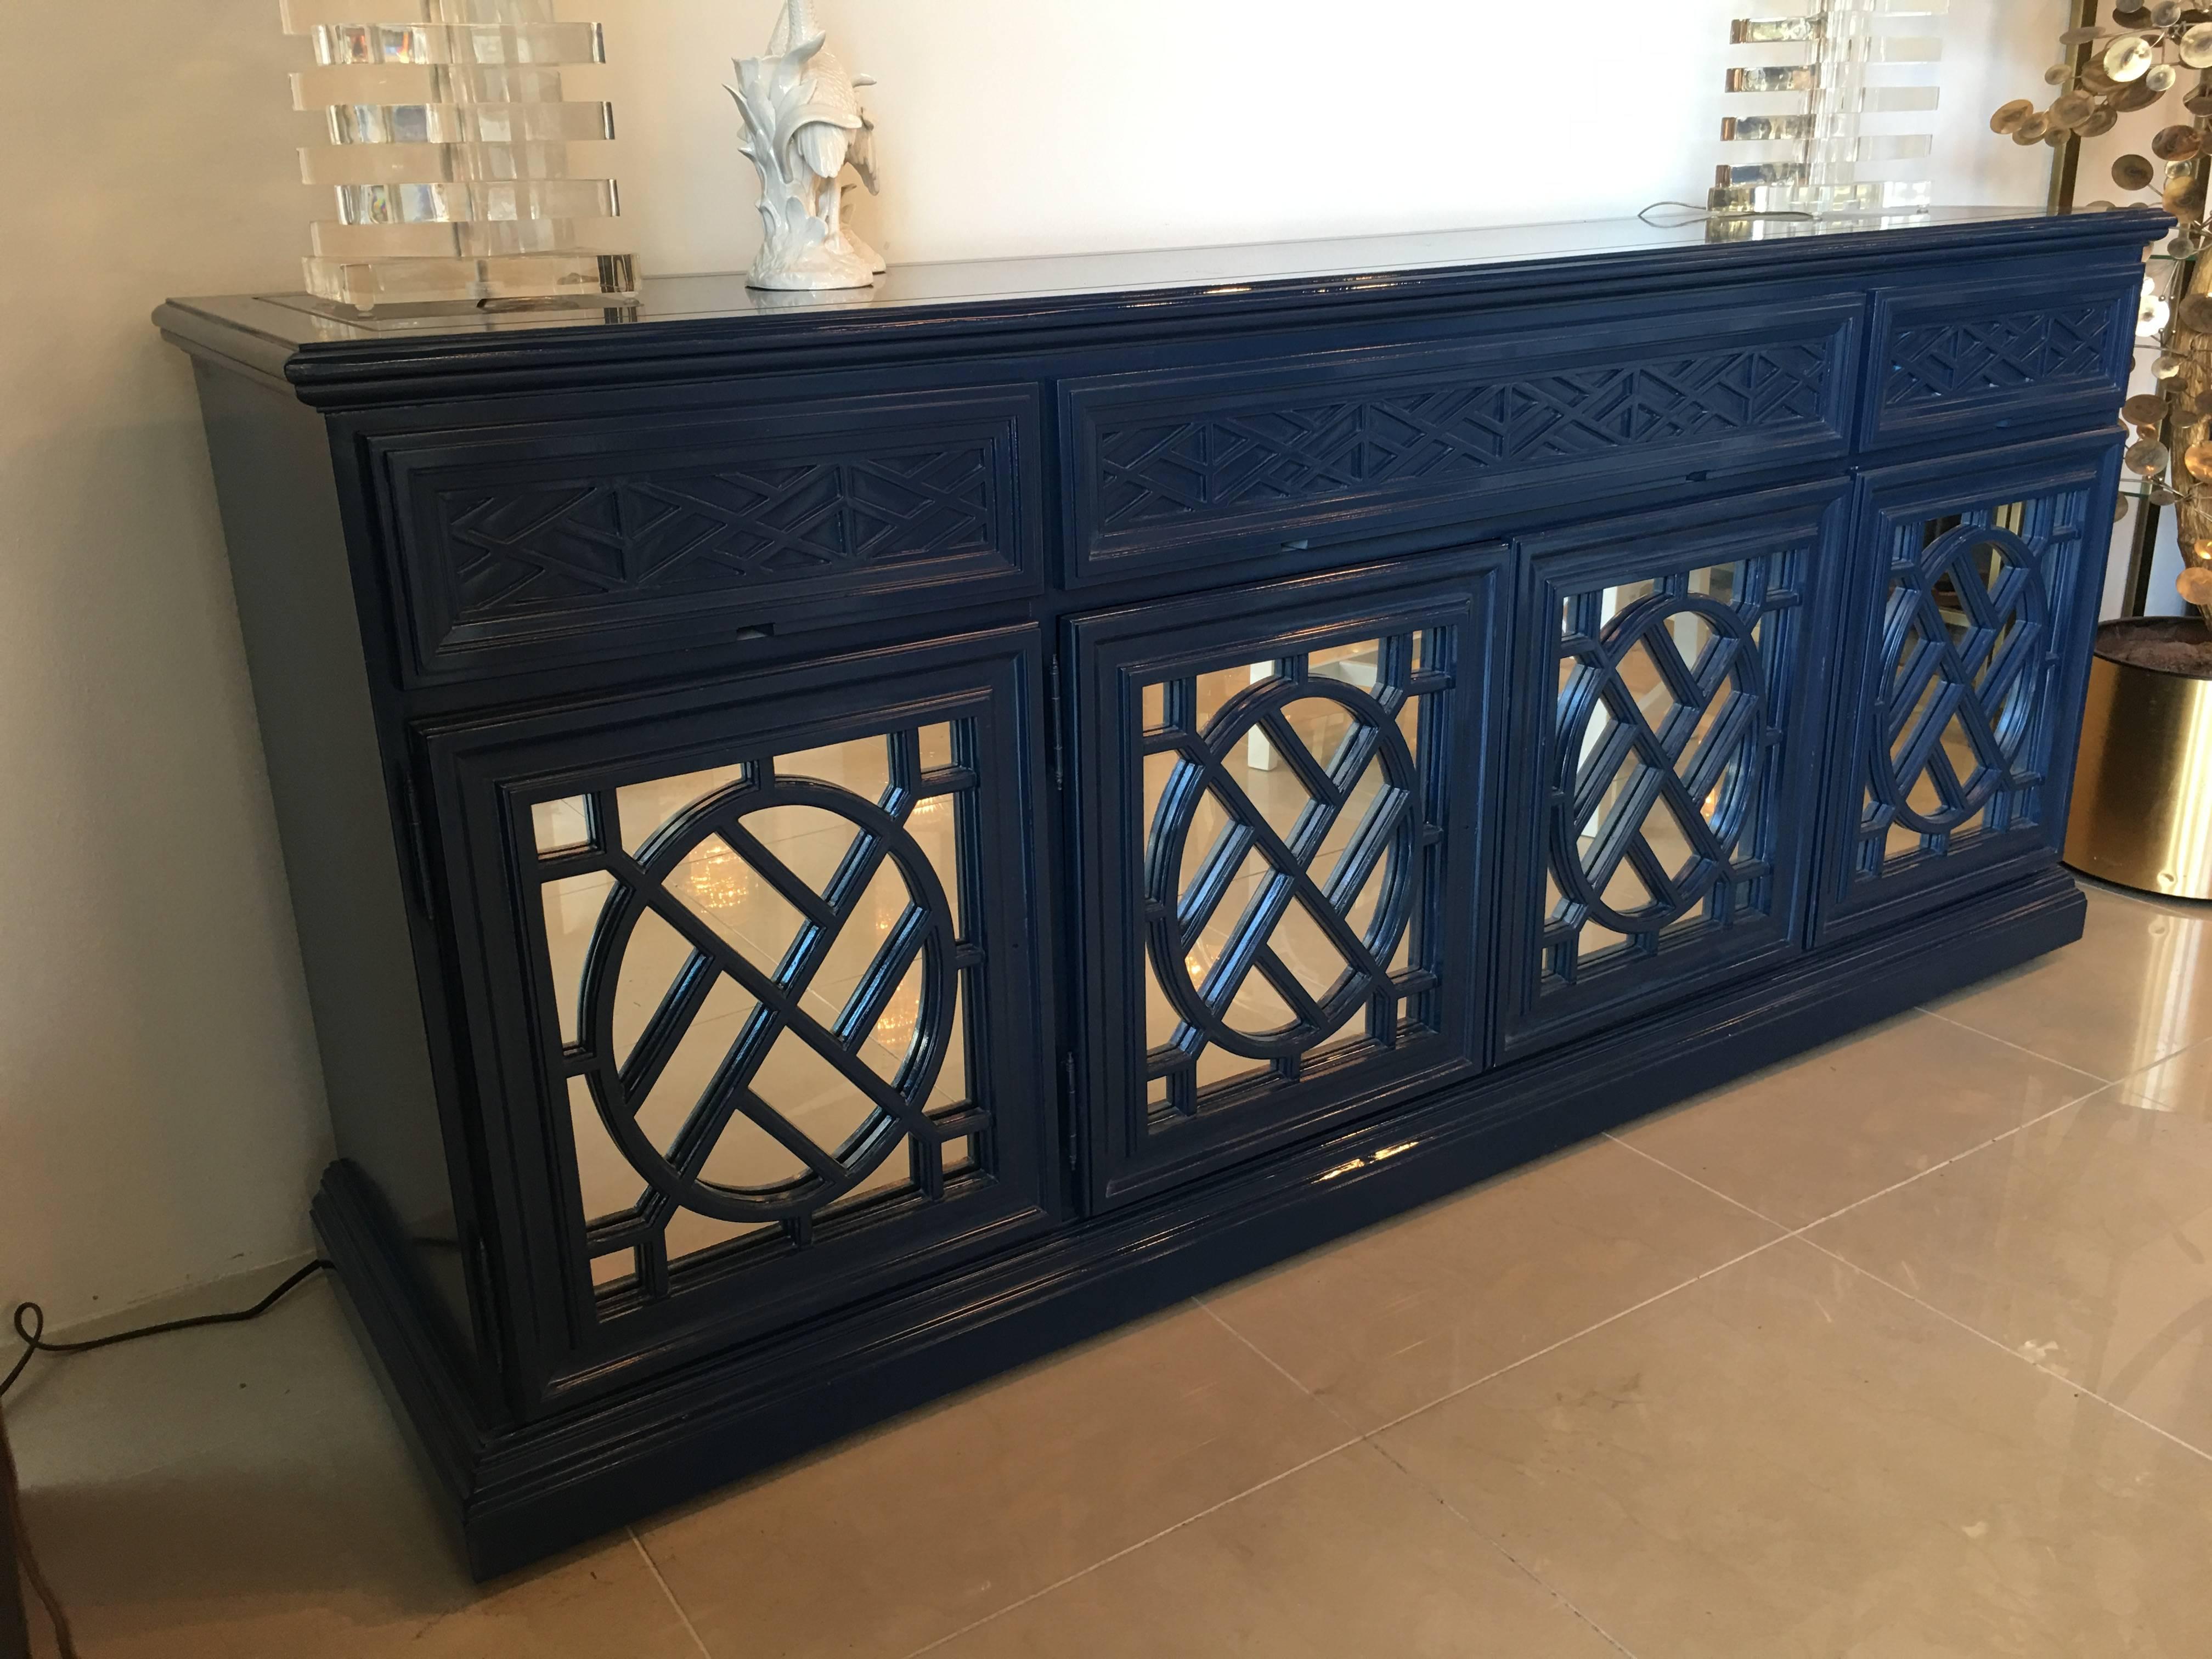 Late 20th Century Chinese Chippendale Fretwork Credenza Sideboard Buffet Newly Lacquered Mirrored